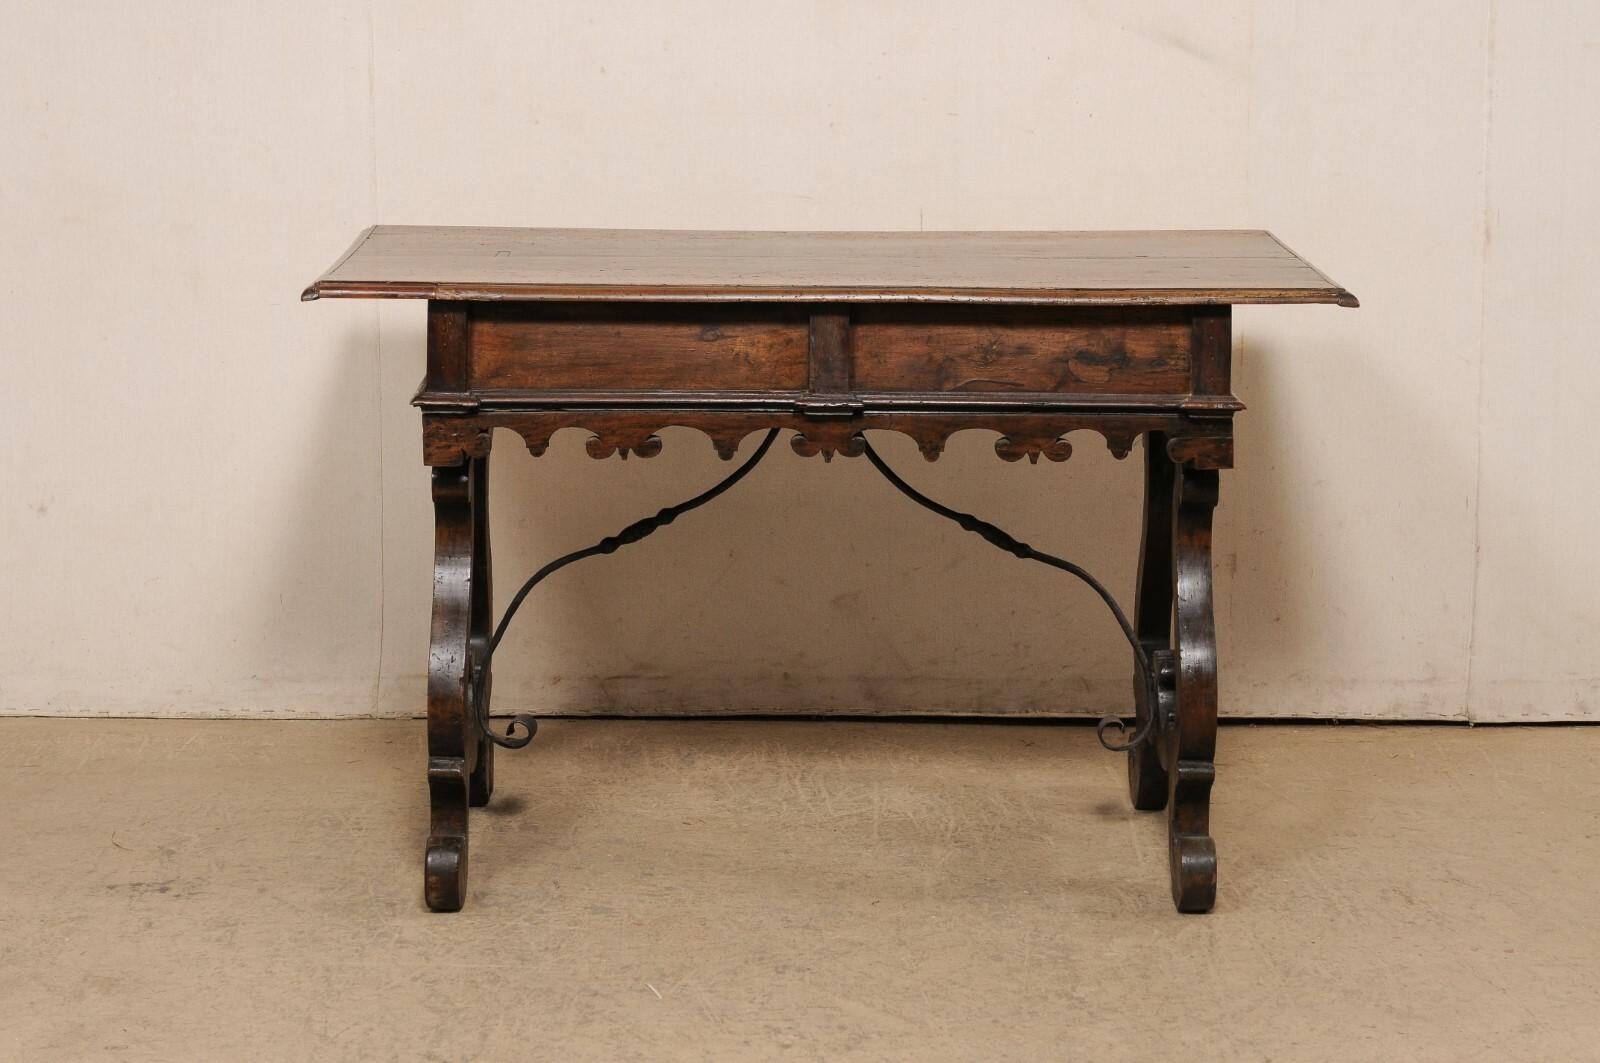 Late 18th Century Italian Fratino Table w/Drawers & Forged Iron Stretcher For Sale 2